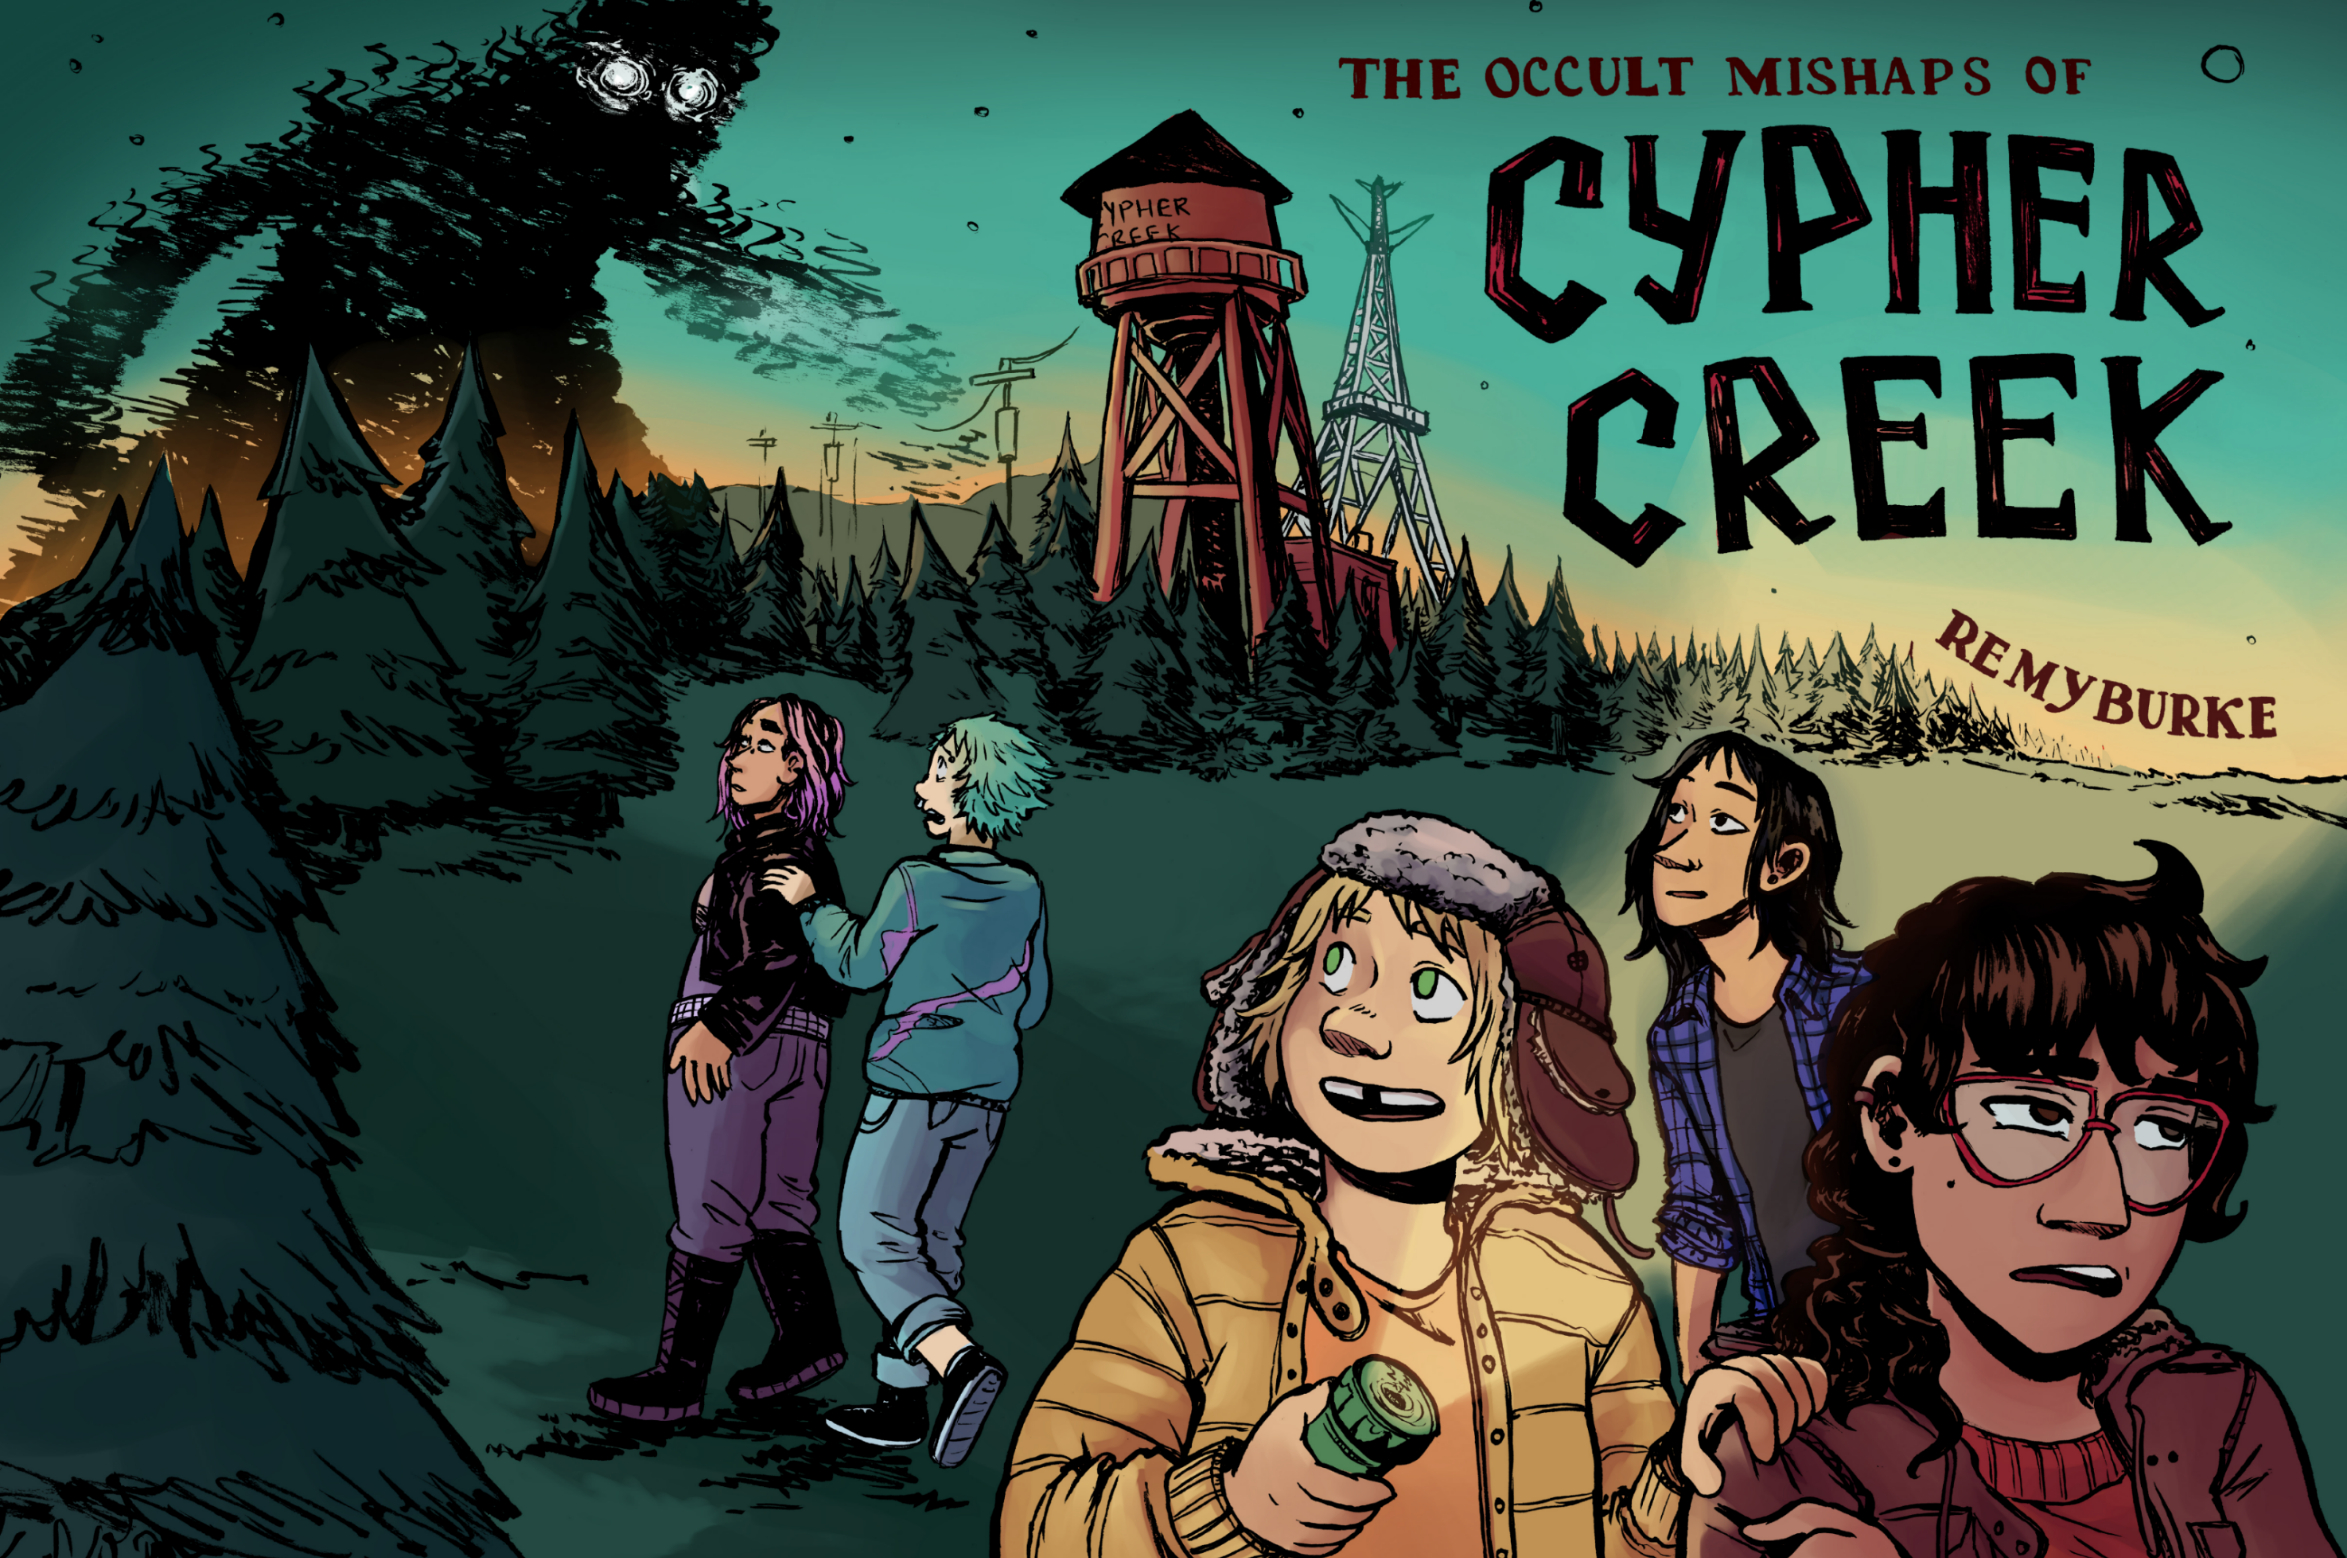 THE OCCULT MISHAPS OF CYPHER CREEK